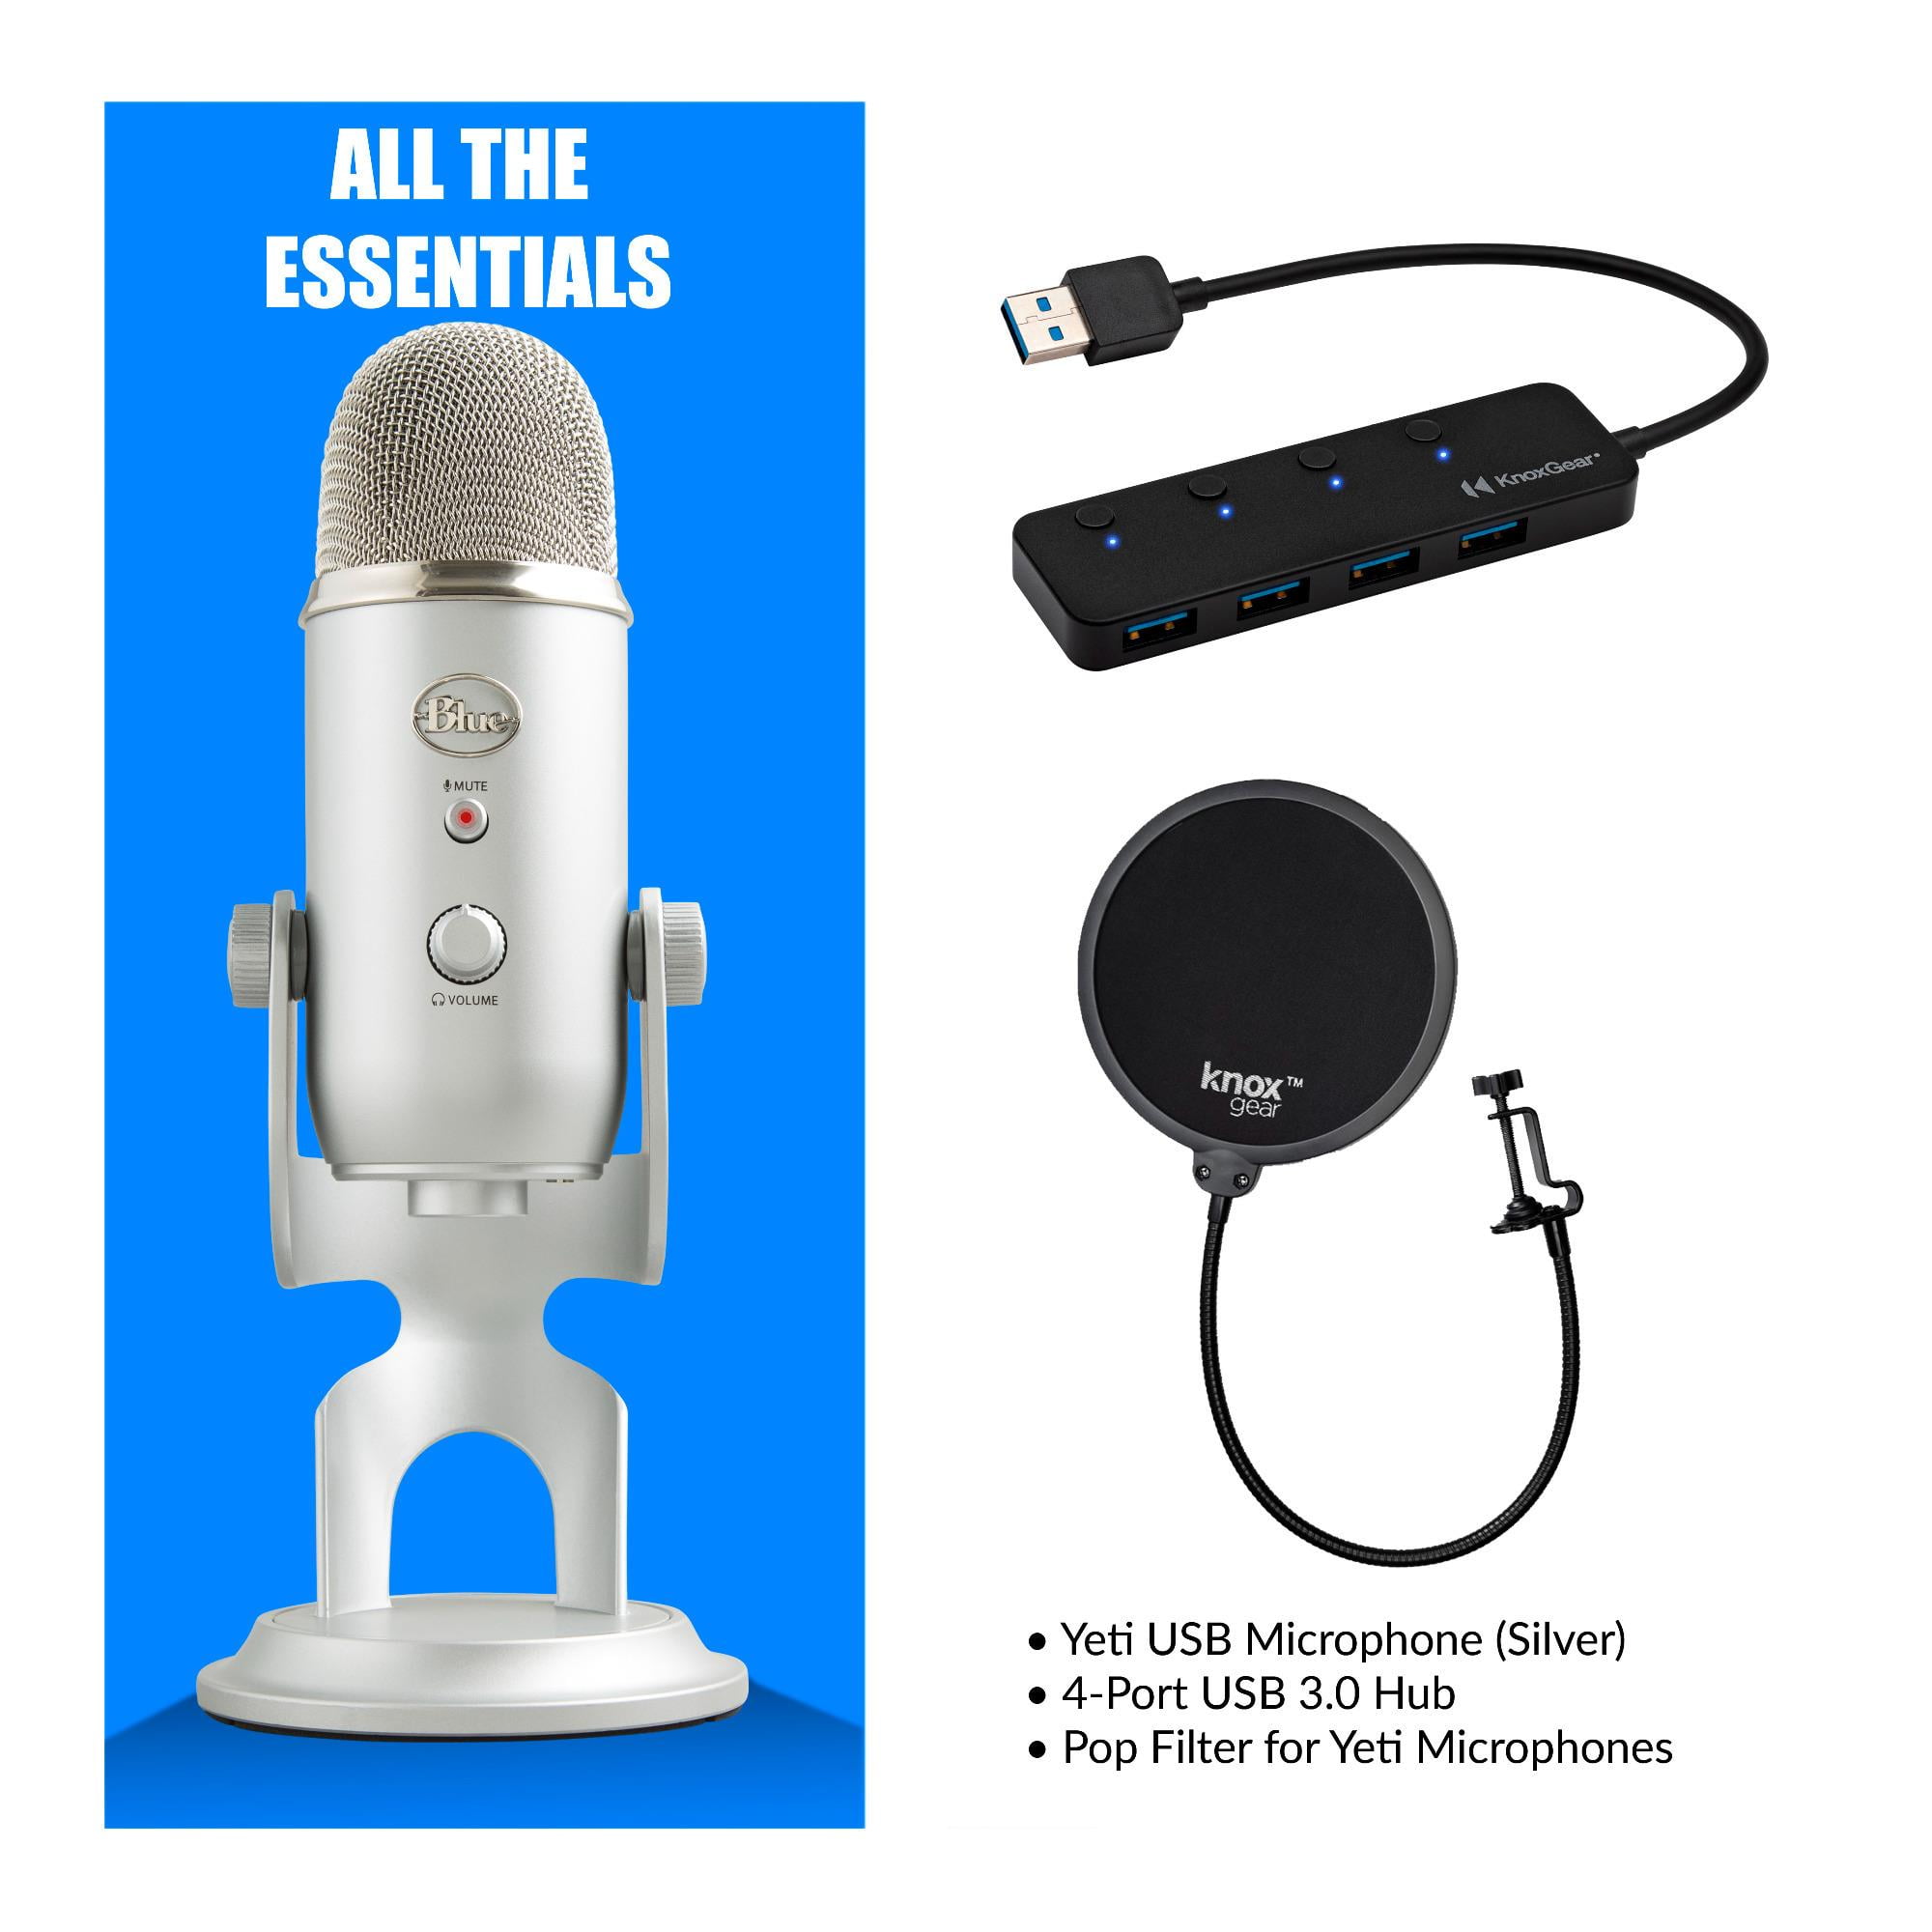  YOUSHARES Microphone Case with Pop Filter Compatible with Blue  Yeti Microphone, Yeti Pro Mic, Yeti X, Yeti Accessories, Travel Case Fit  Blue Yeti Cable and Other Accessories. : Musical Instruments